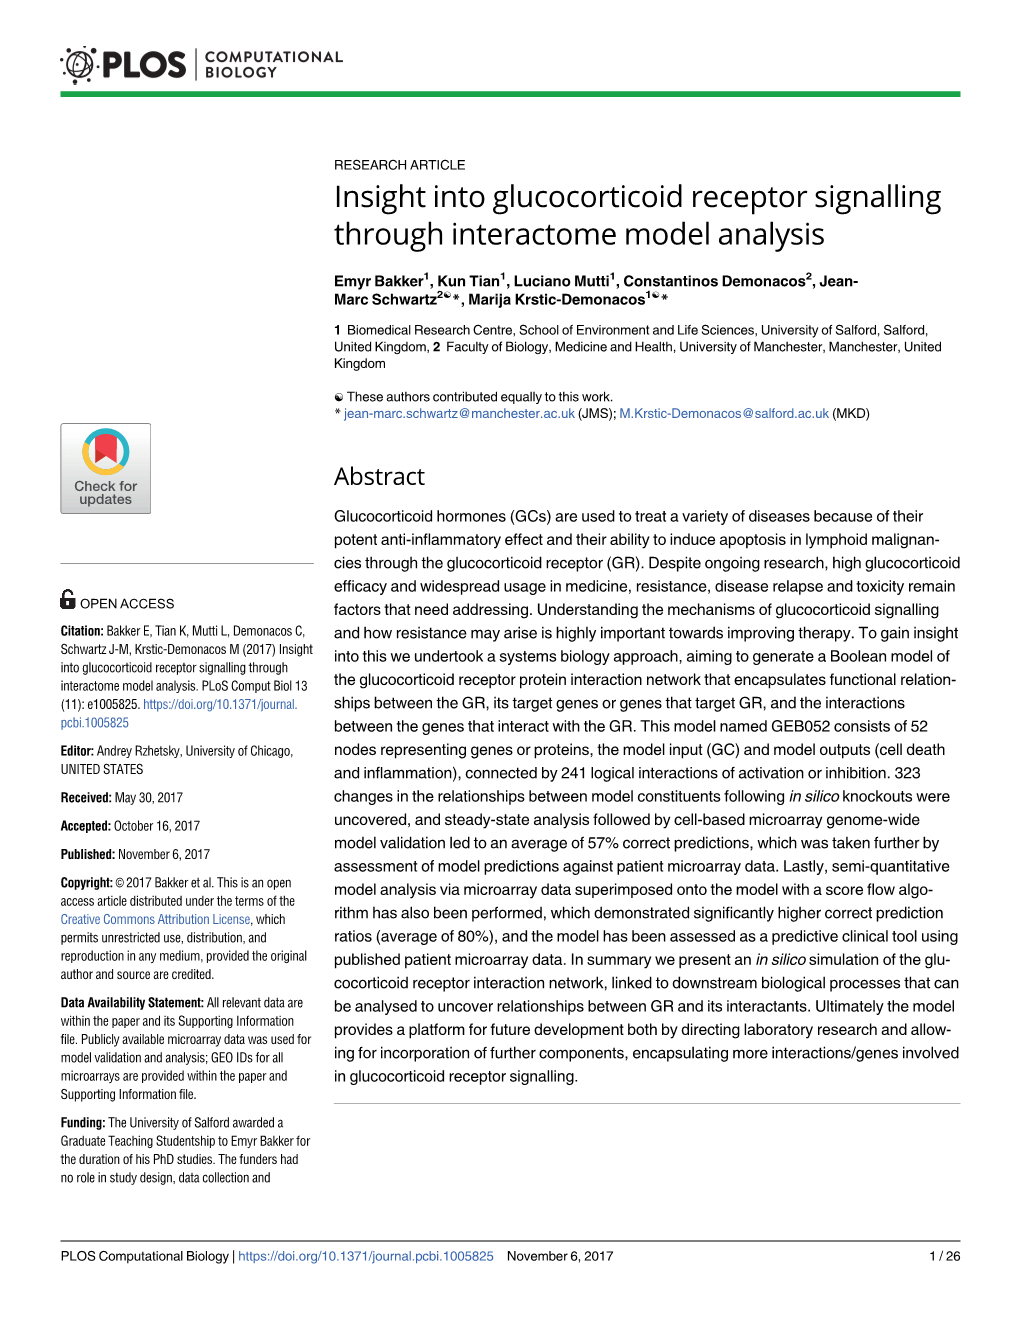 Insight Into Glucocorticoid Receptor Signalling Through Interactome Model Analysis